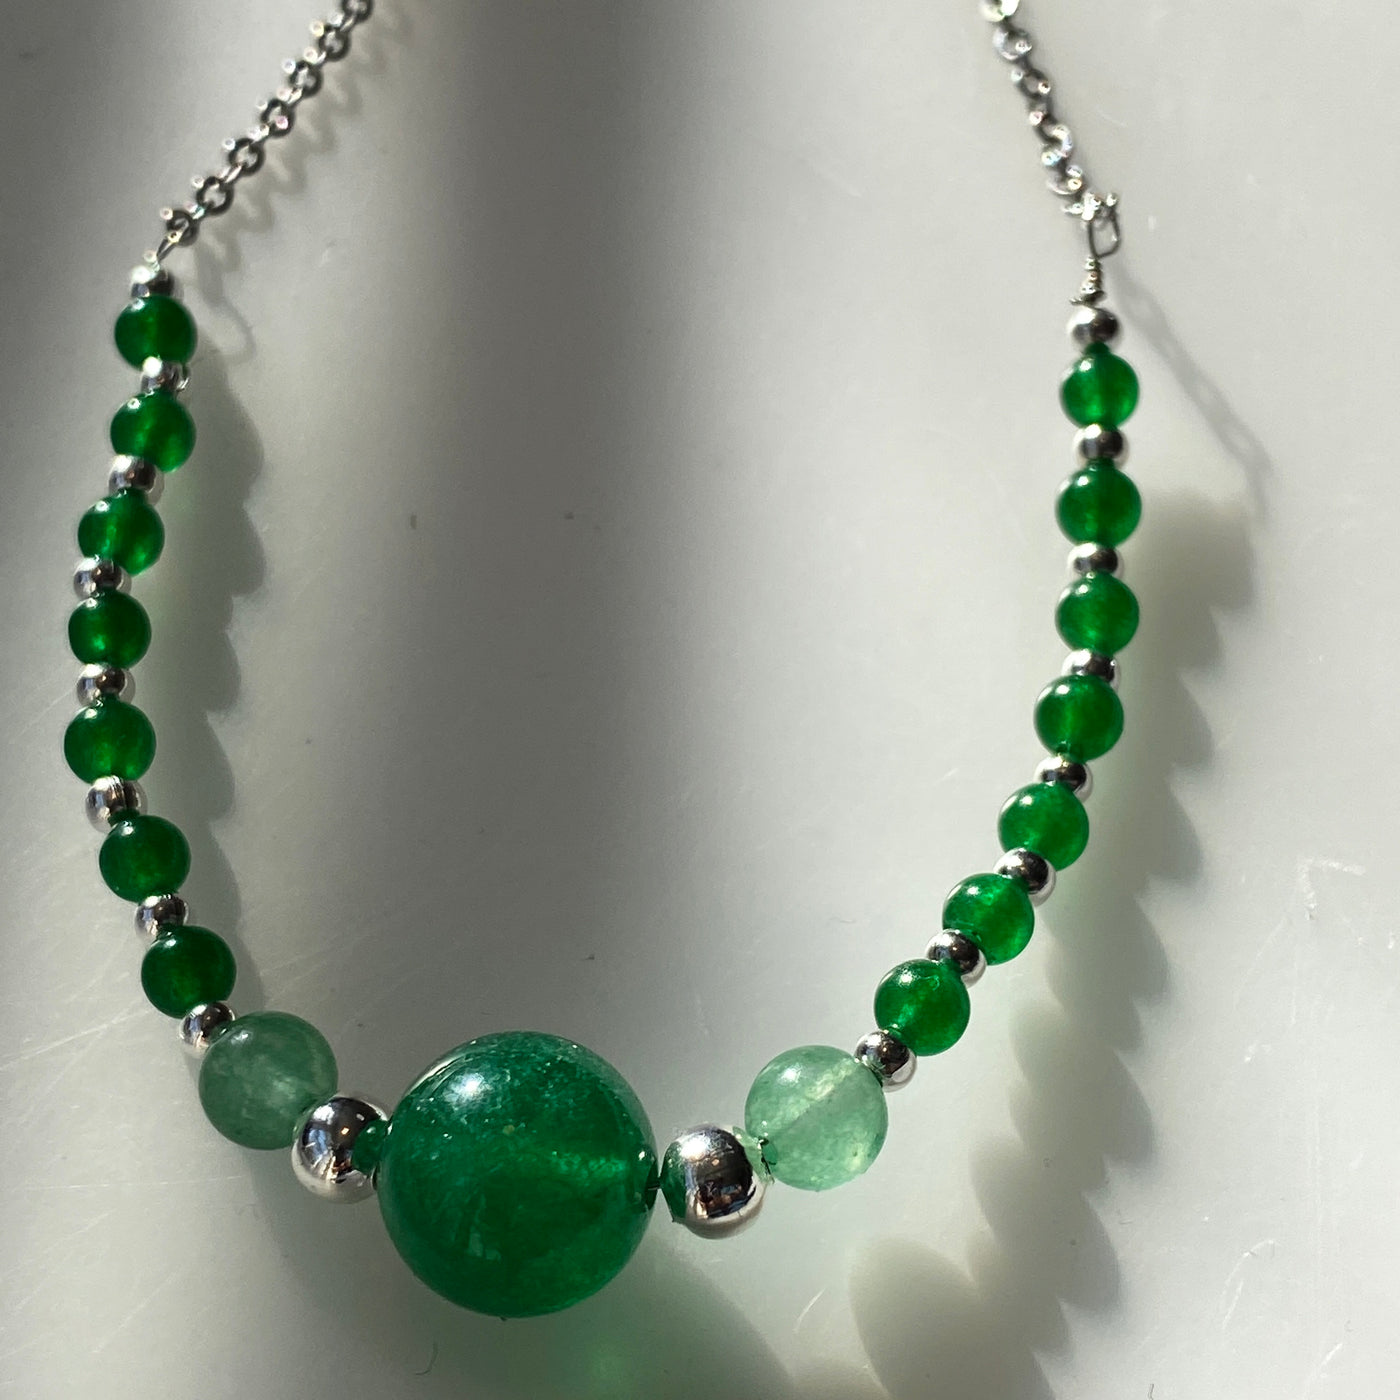 Necklace with green calcedony in different sizes and aventurine